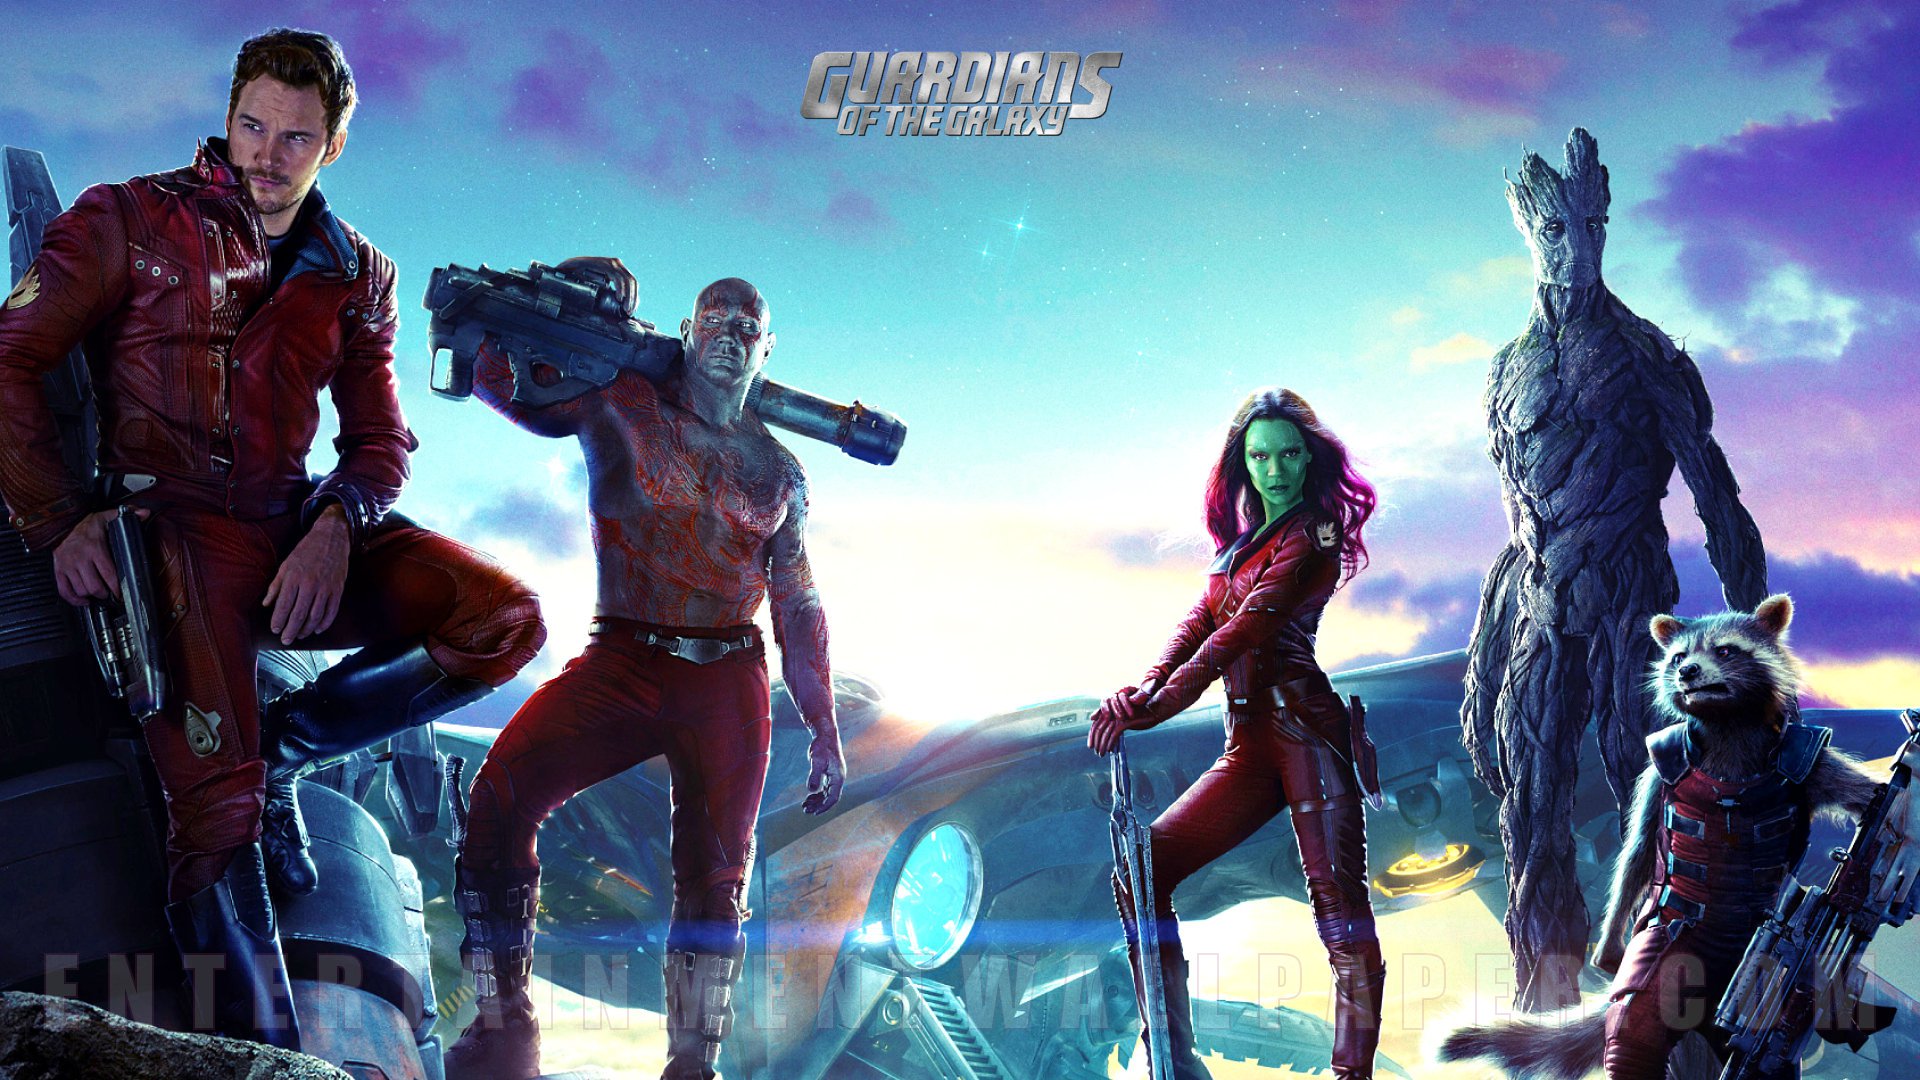 Guardians of the Galaxy1